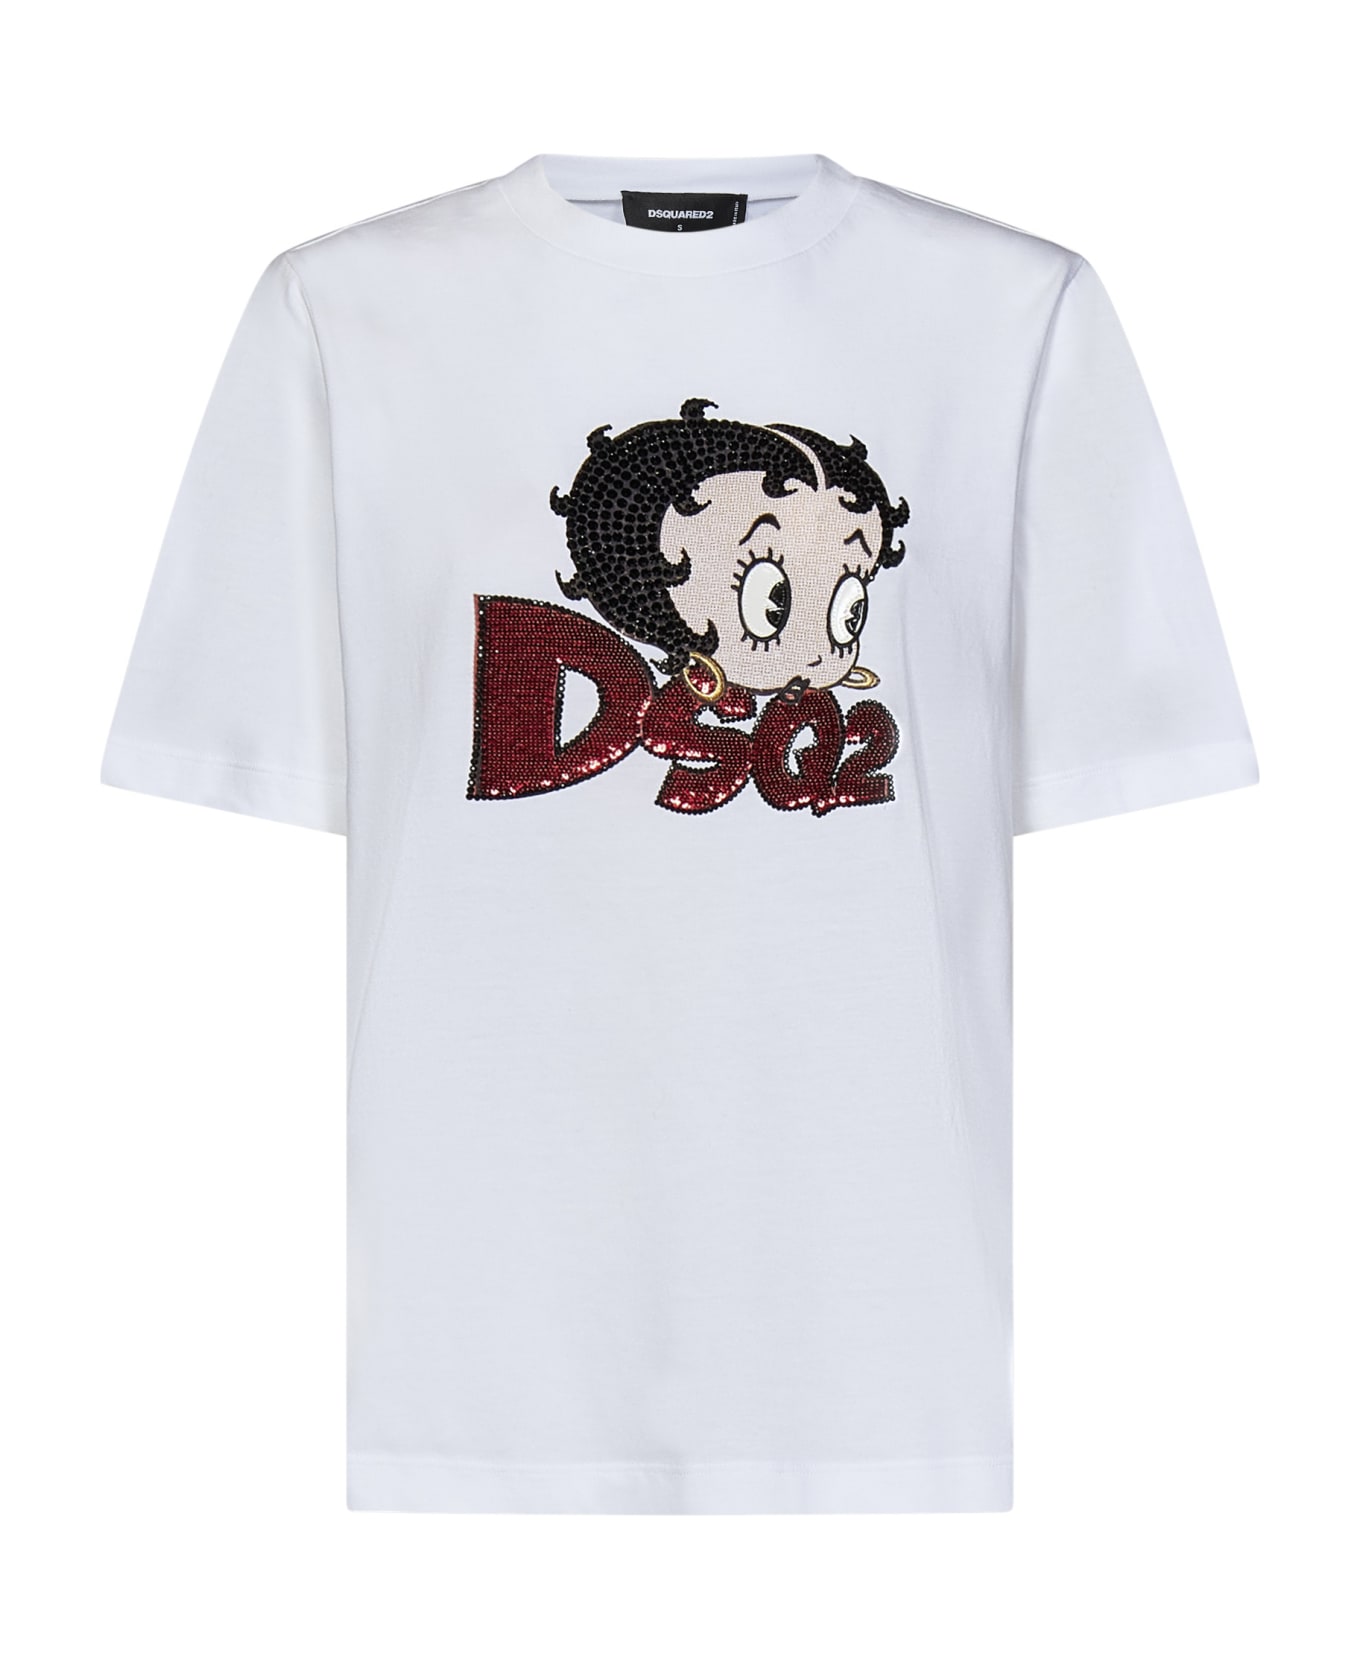 Dsquared2 Betty Boop Easy Fit T-shirt - White